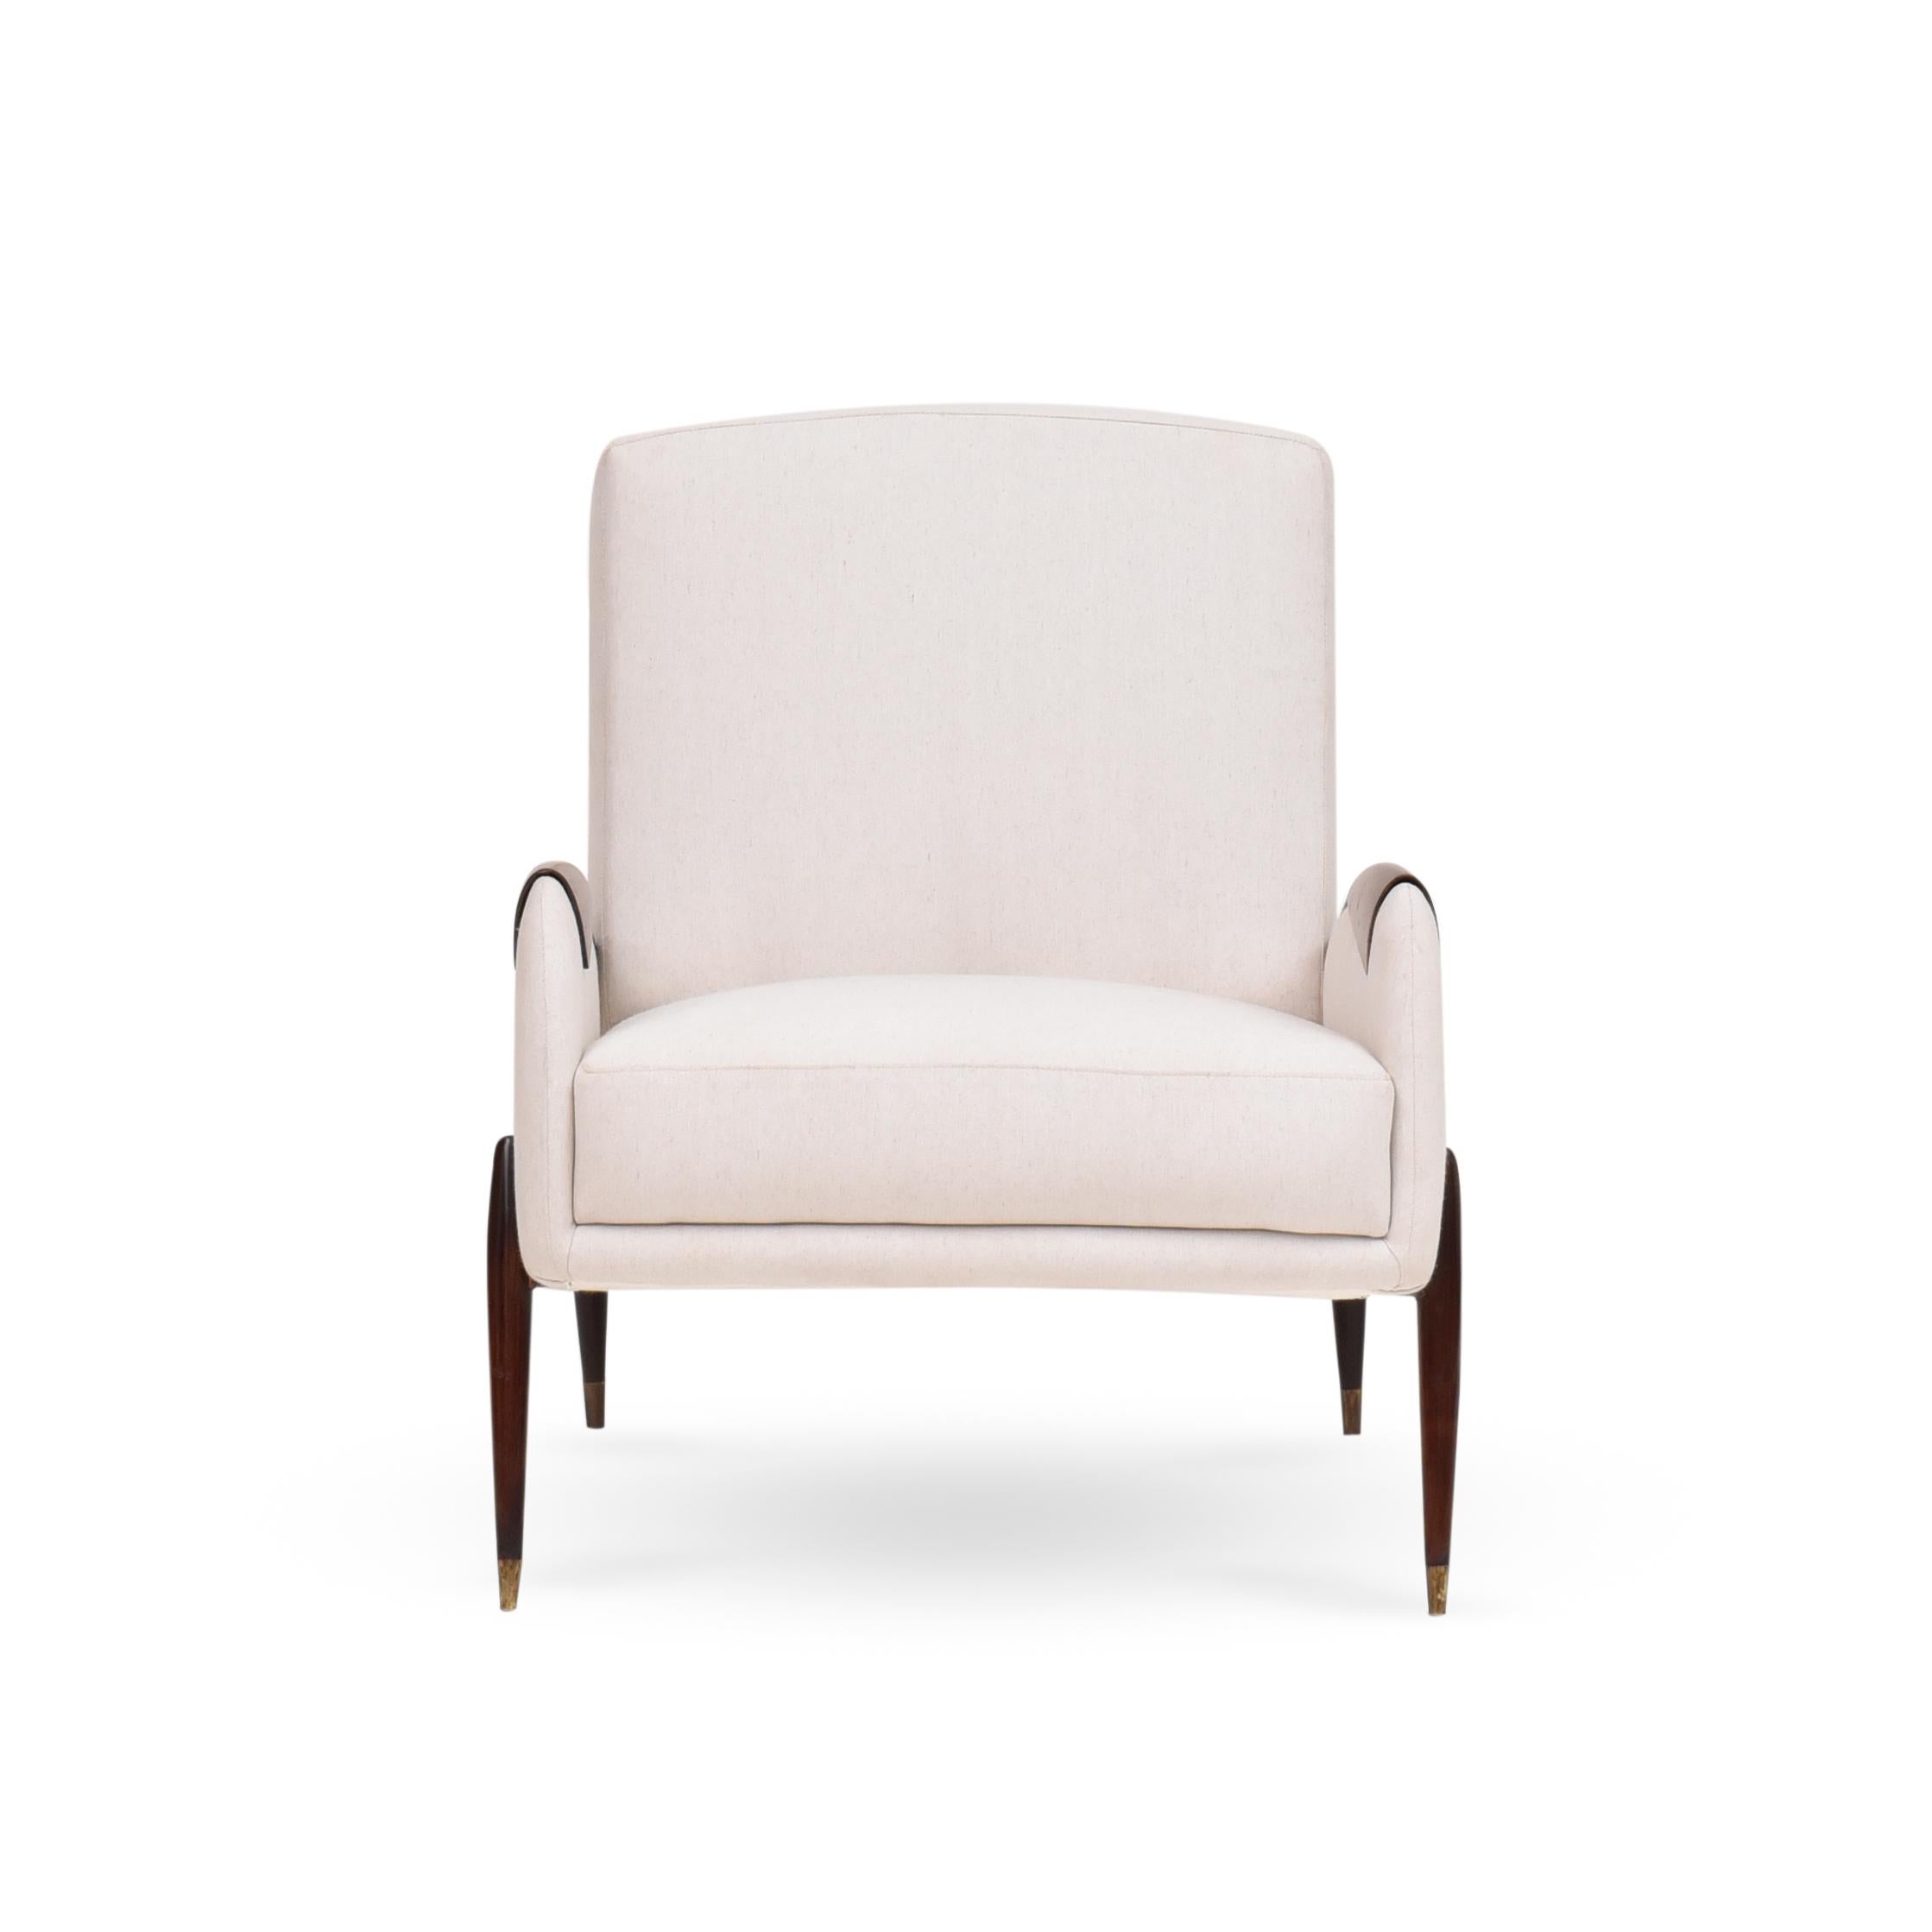 Midcentury Brazilian Armchair by Liceu de Artes e Ofícios, 1960s

Armchair with wooden frame and velvet upholstery. Its main characteristic is the elegant side arm carved in wood.